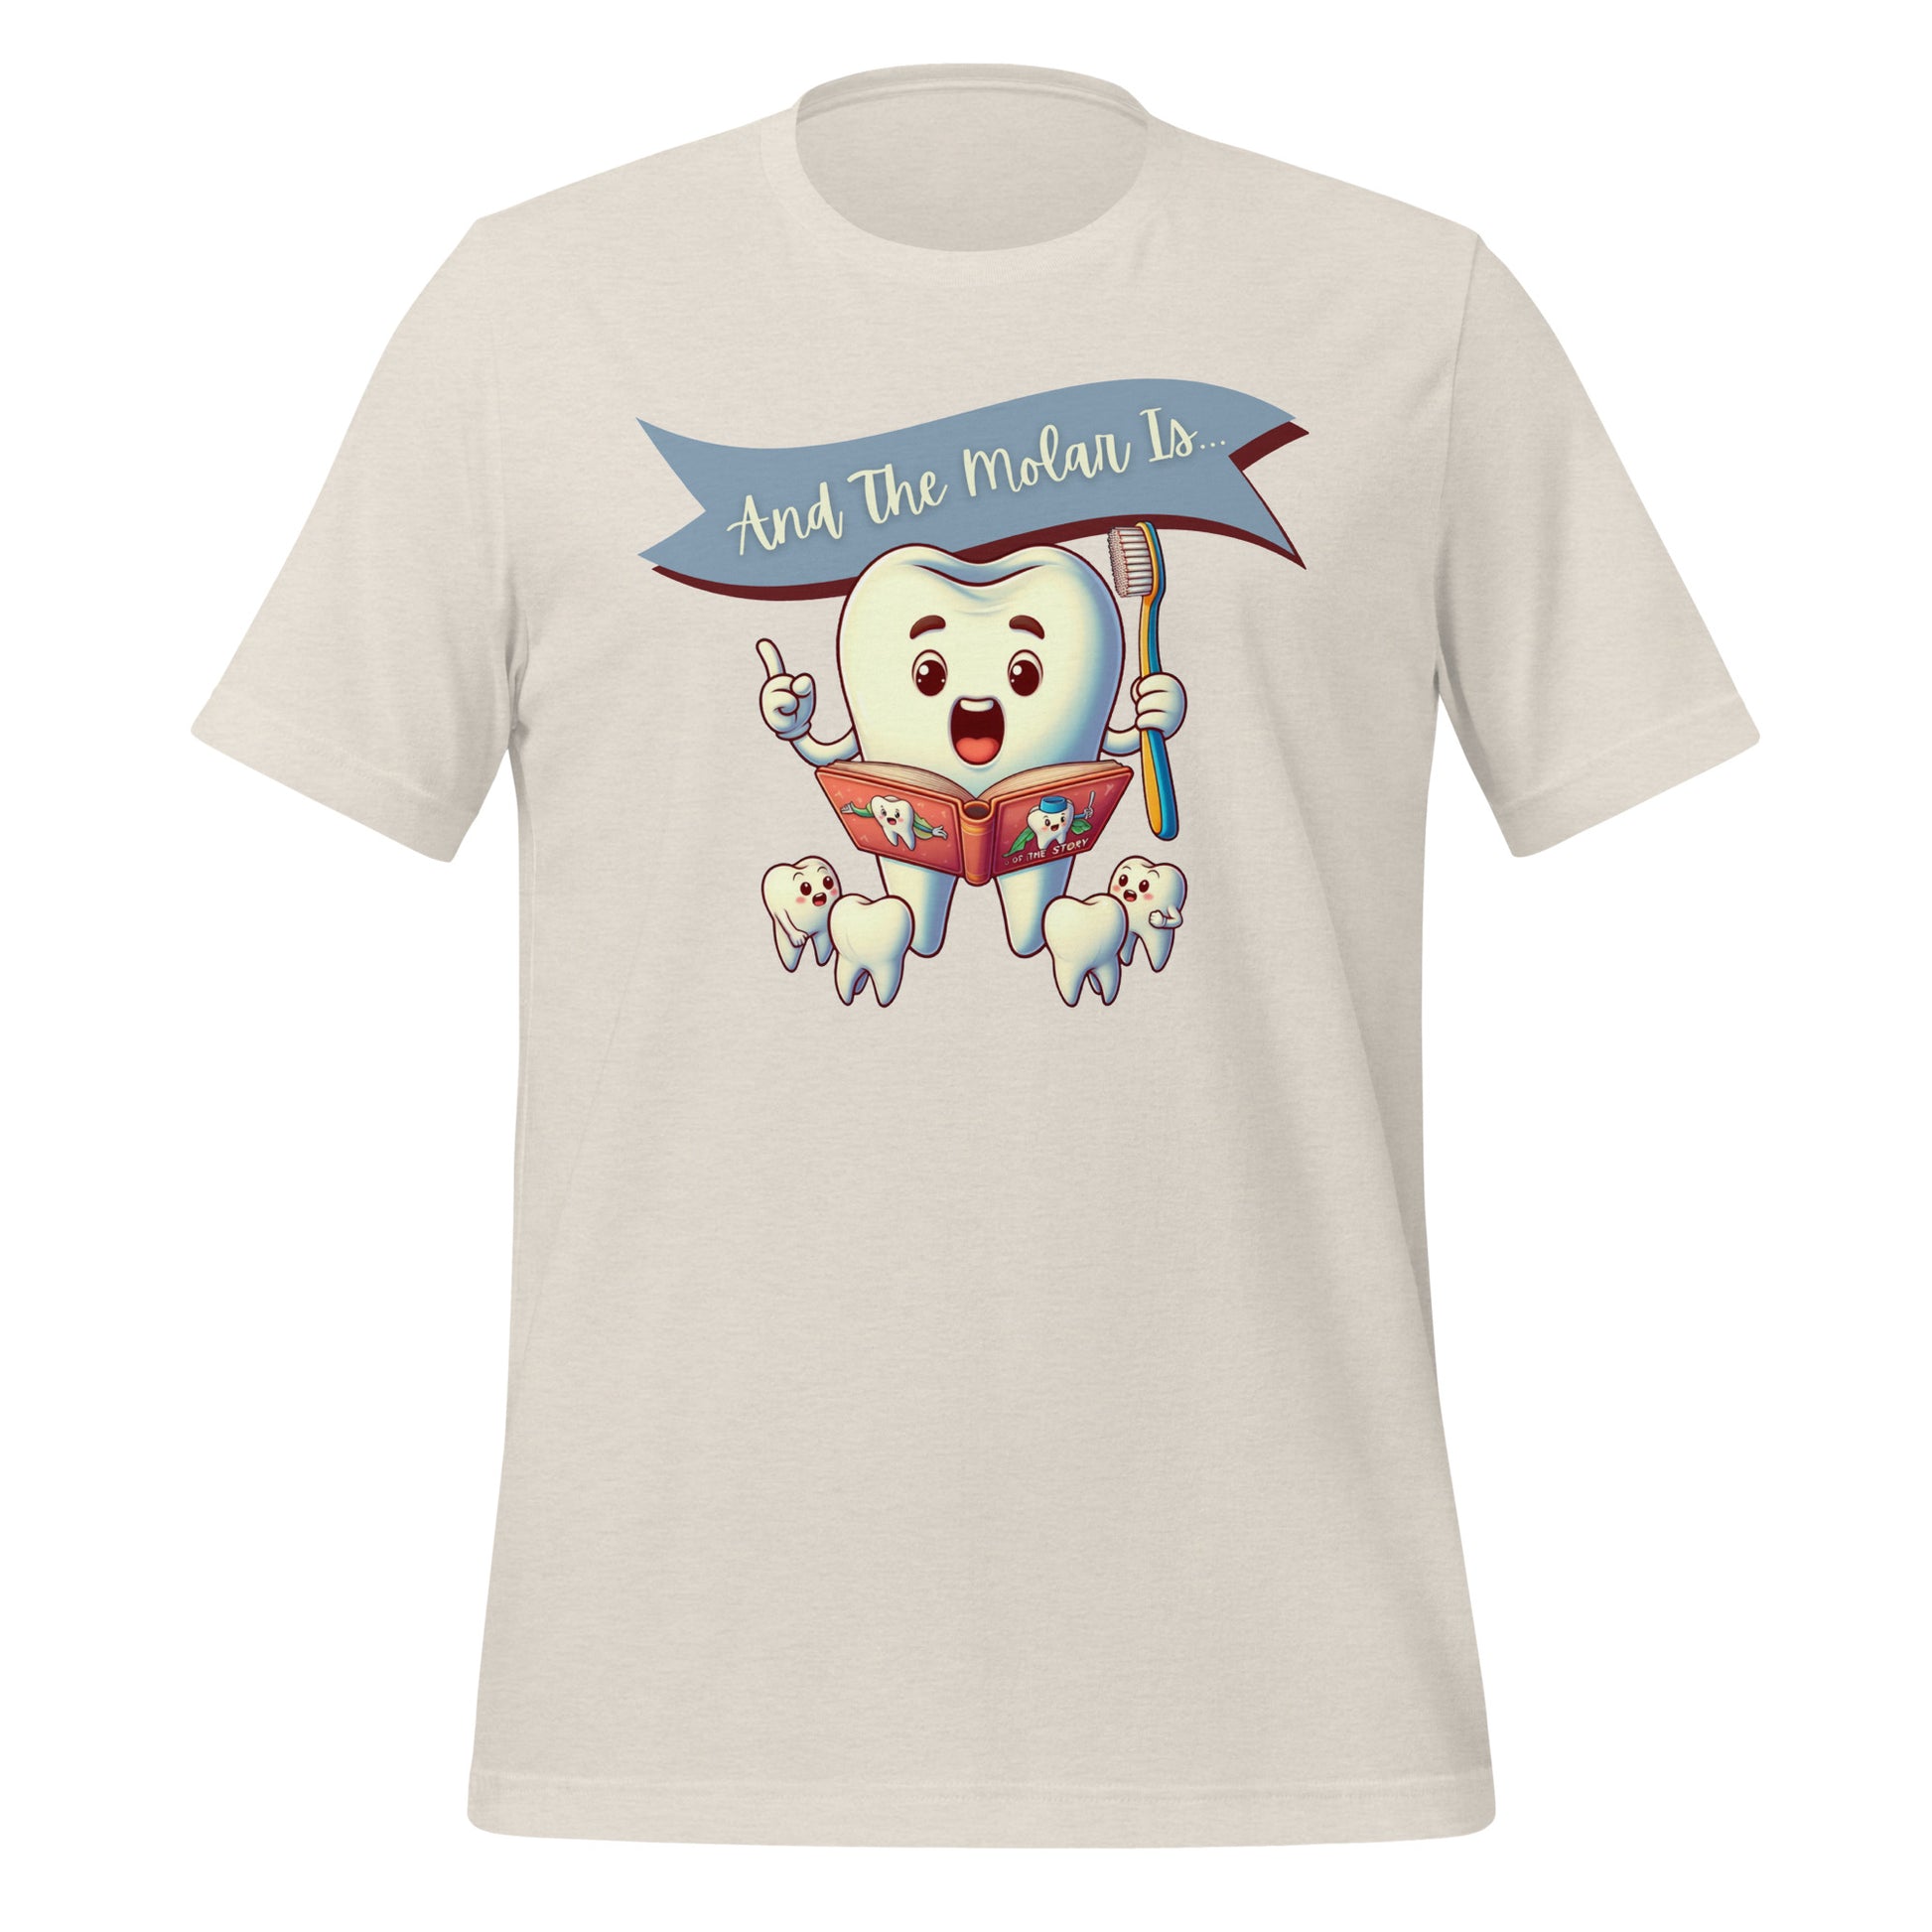 Cute dental shirt featuring a smiling tooth character reading a book with the caption ‘And The Molar Is,’ surrounded by smaller tooth characters. Heather dust color.